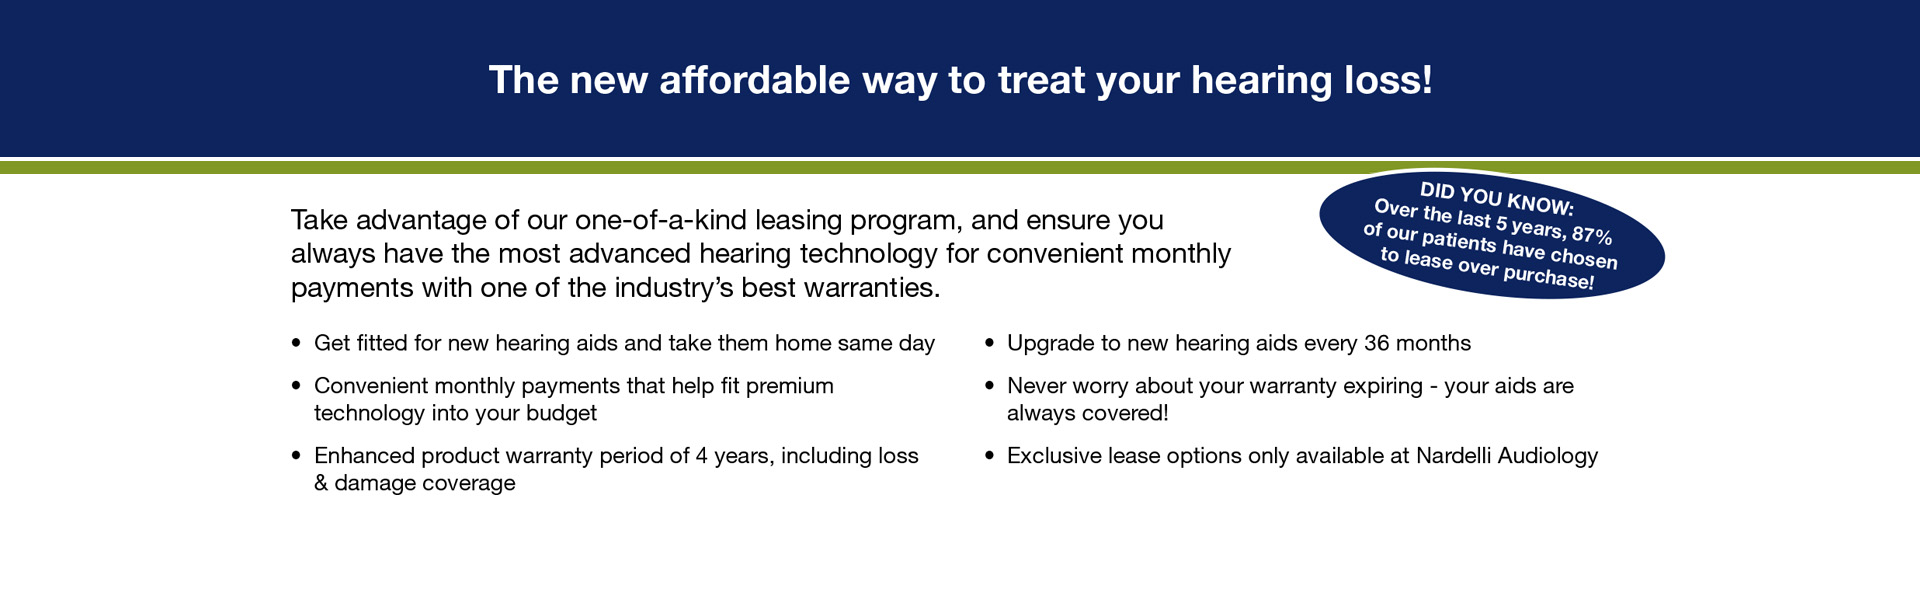 Hearing Aids Lease Banner | Nardelli Audiology